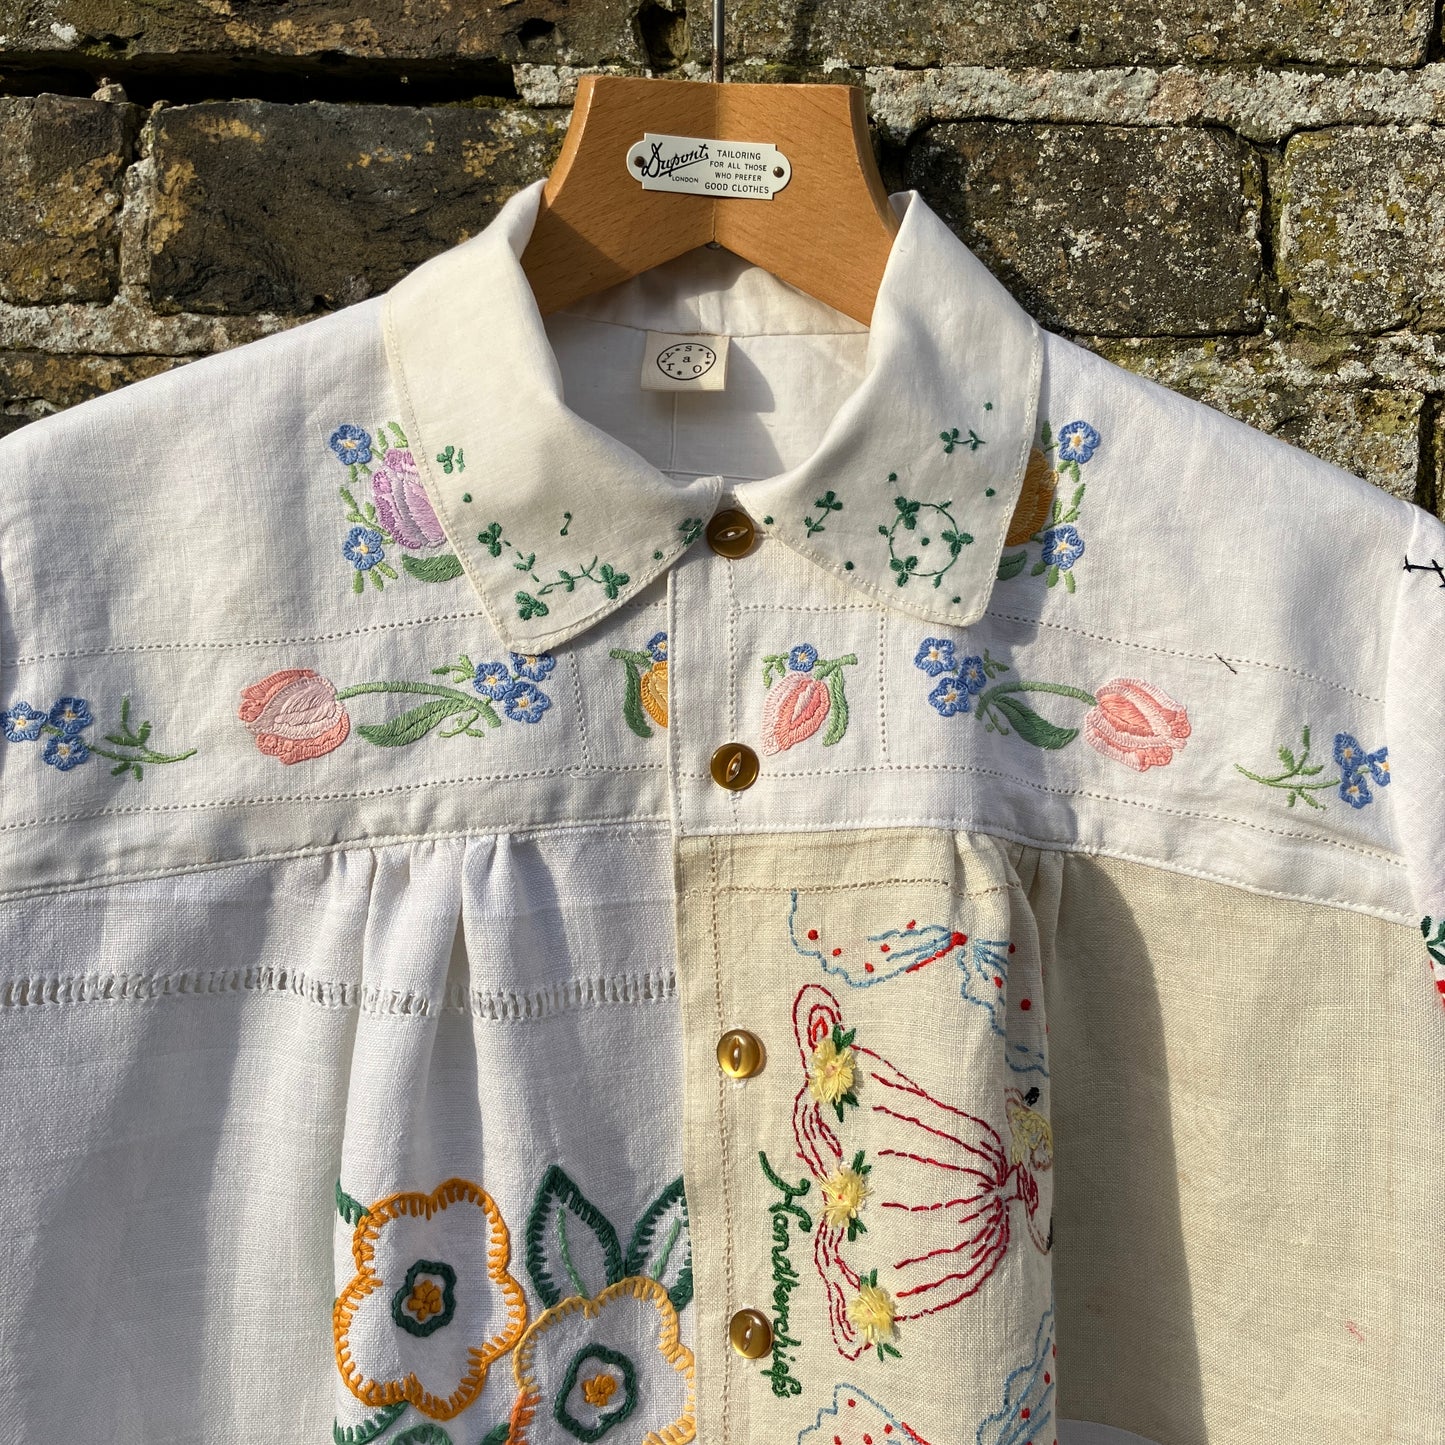 Shirt made from a patchwork of reclaimed vintage linens